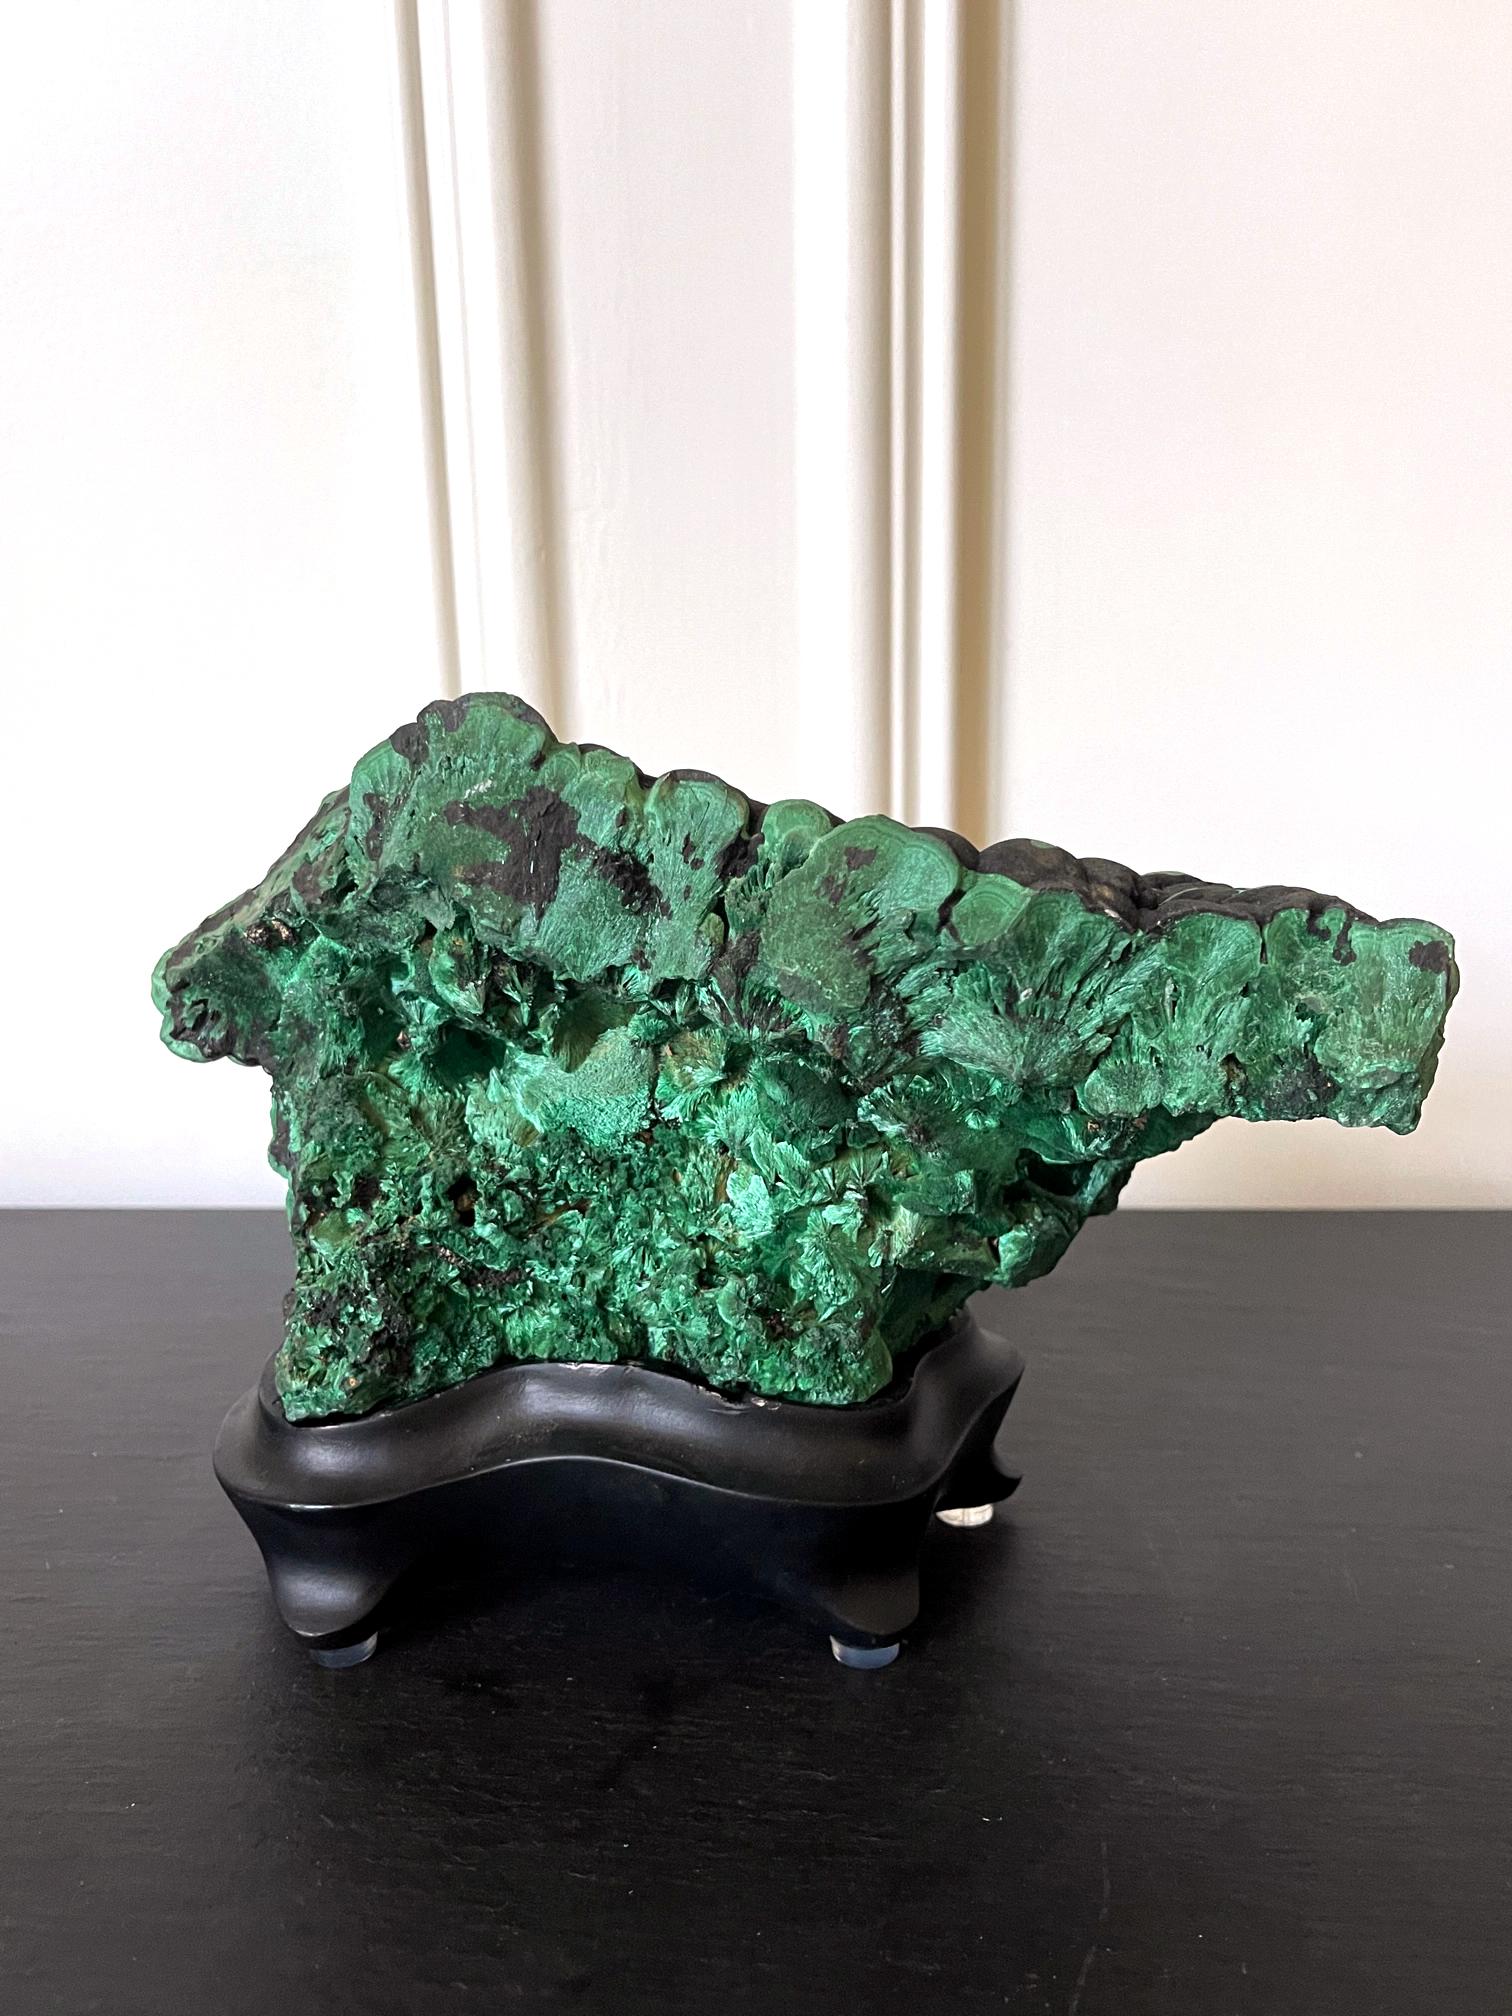 A natural malachite rock specimen with striking green and black colors fitted on a wood stand for viewing and meditating. The gemstone has pointed and jagged surface on one side and a botryoidal form on the other side, revealing a beautiful, mottled